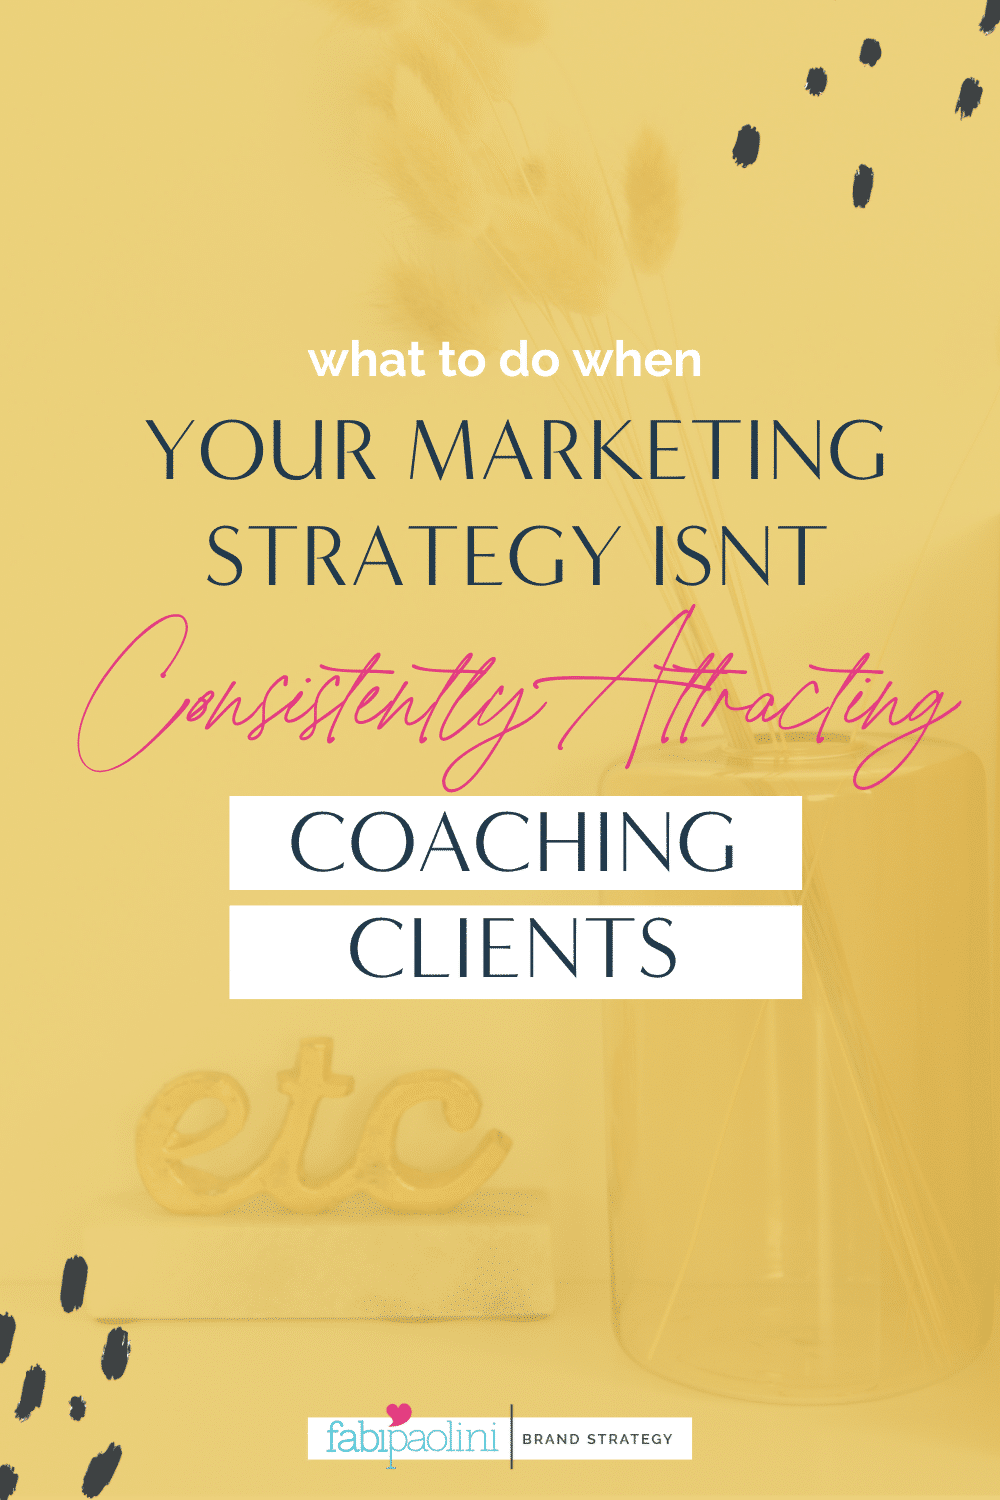 What to do when your marketing strategy isn't consistently attracting premium coaching clients in a consistent way Fabi Paolini Brand Strategist